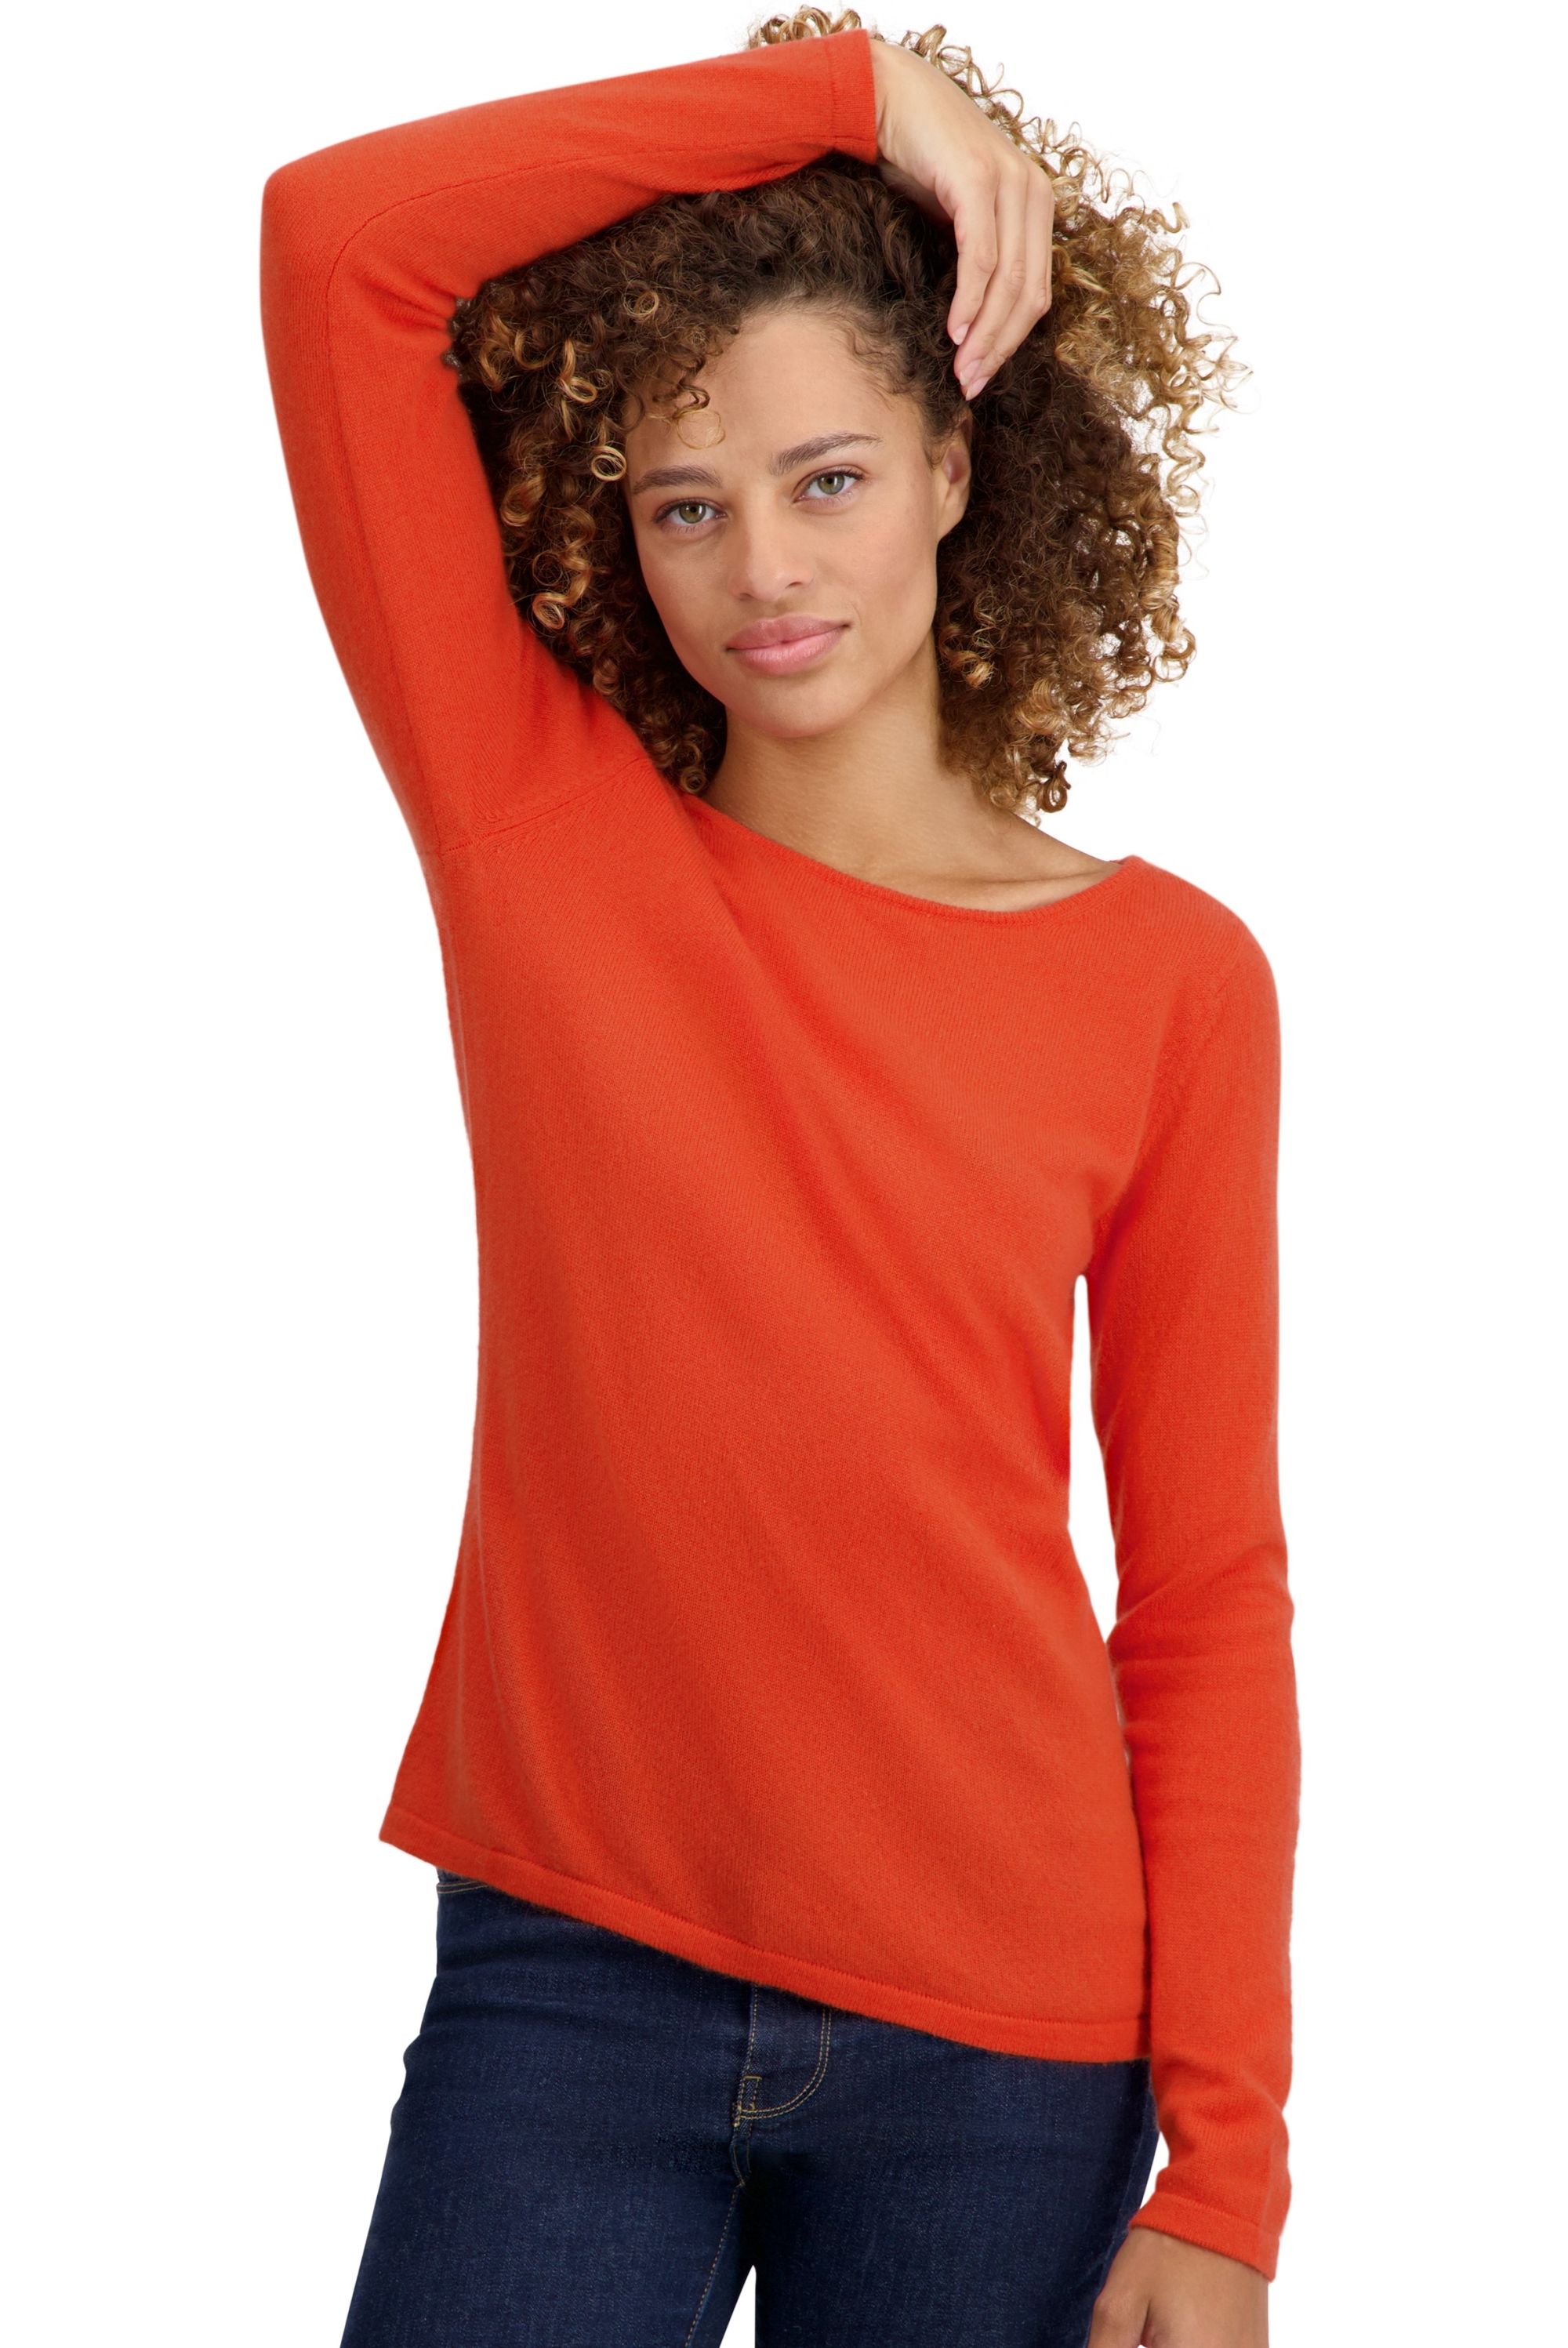 Cashmere ladies basic sweaters at low prices tennessy first satsuma s